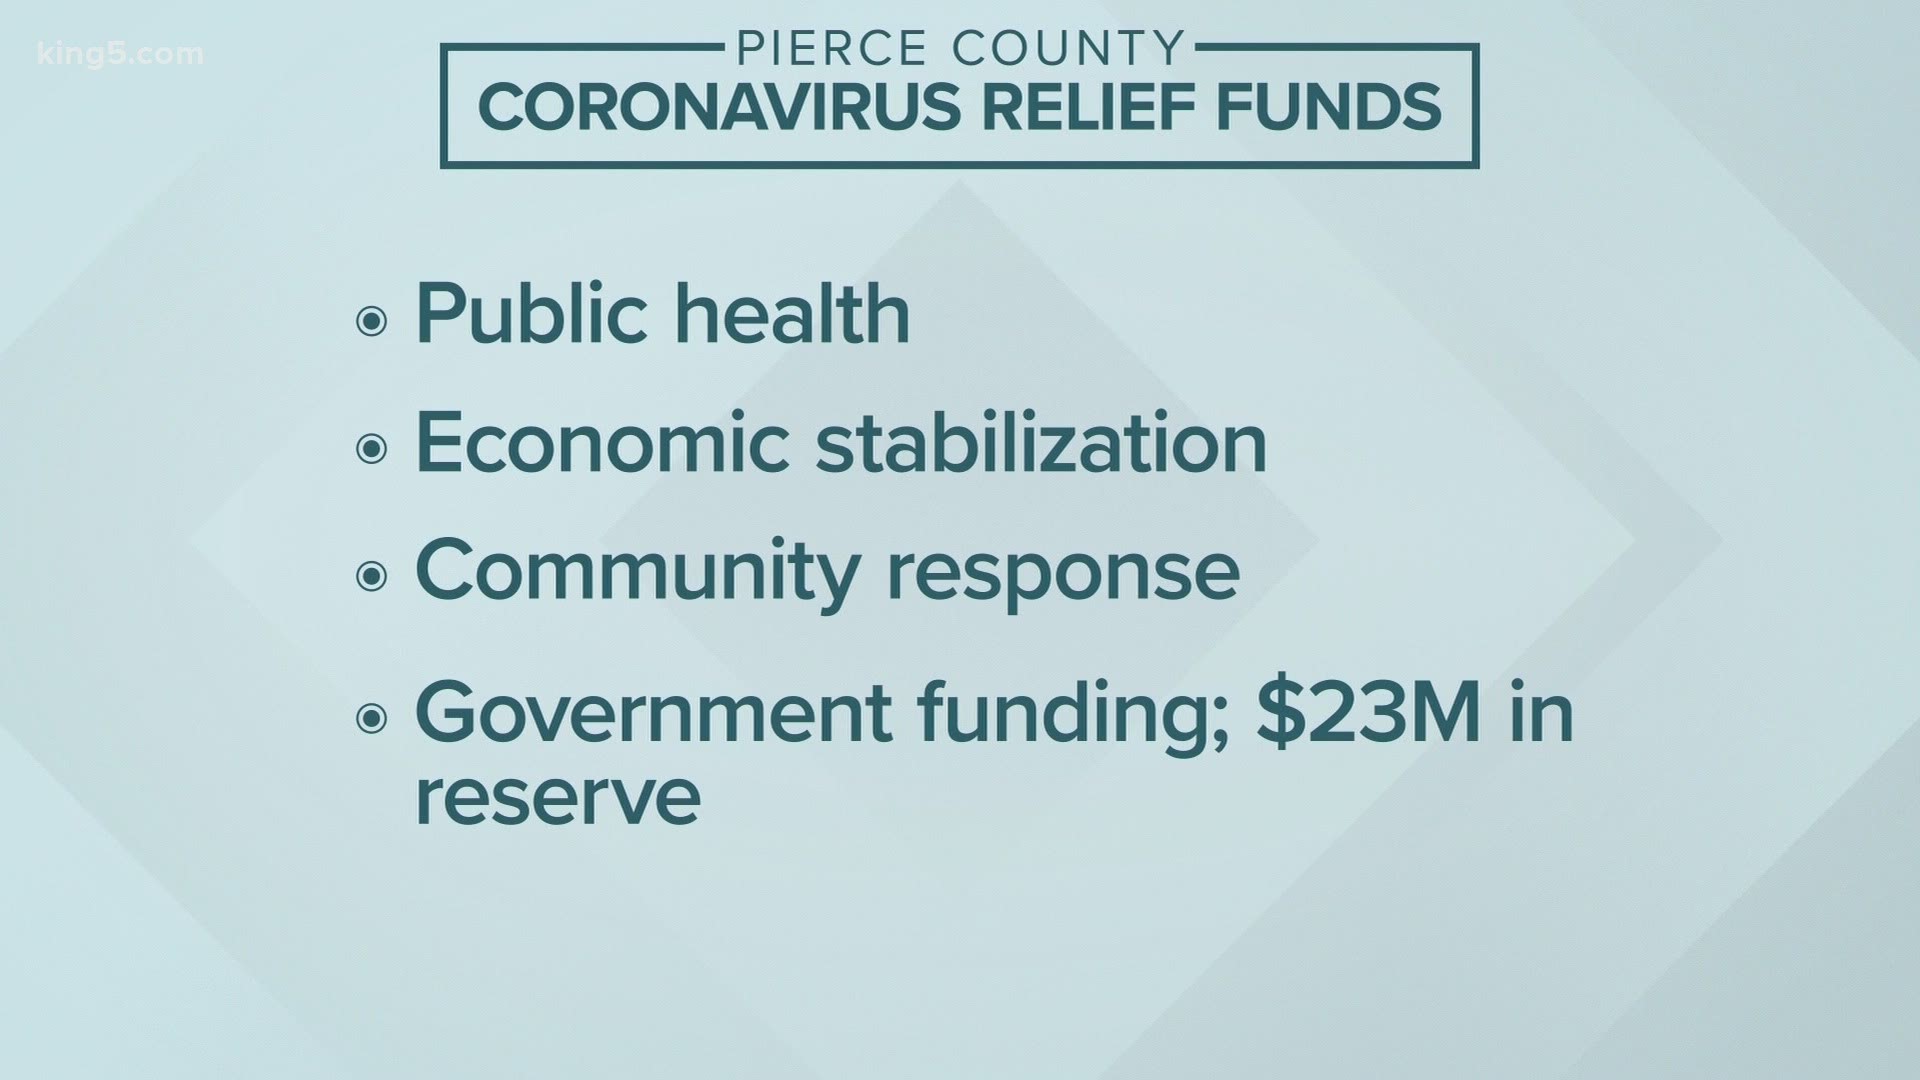 The funding will be distributed between four areas including public health, economic stabilization, community response, and government funding.